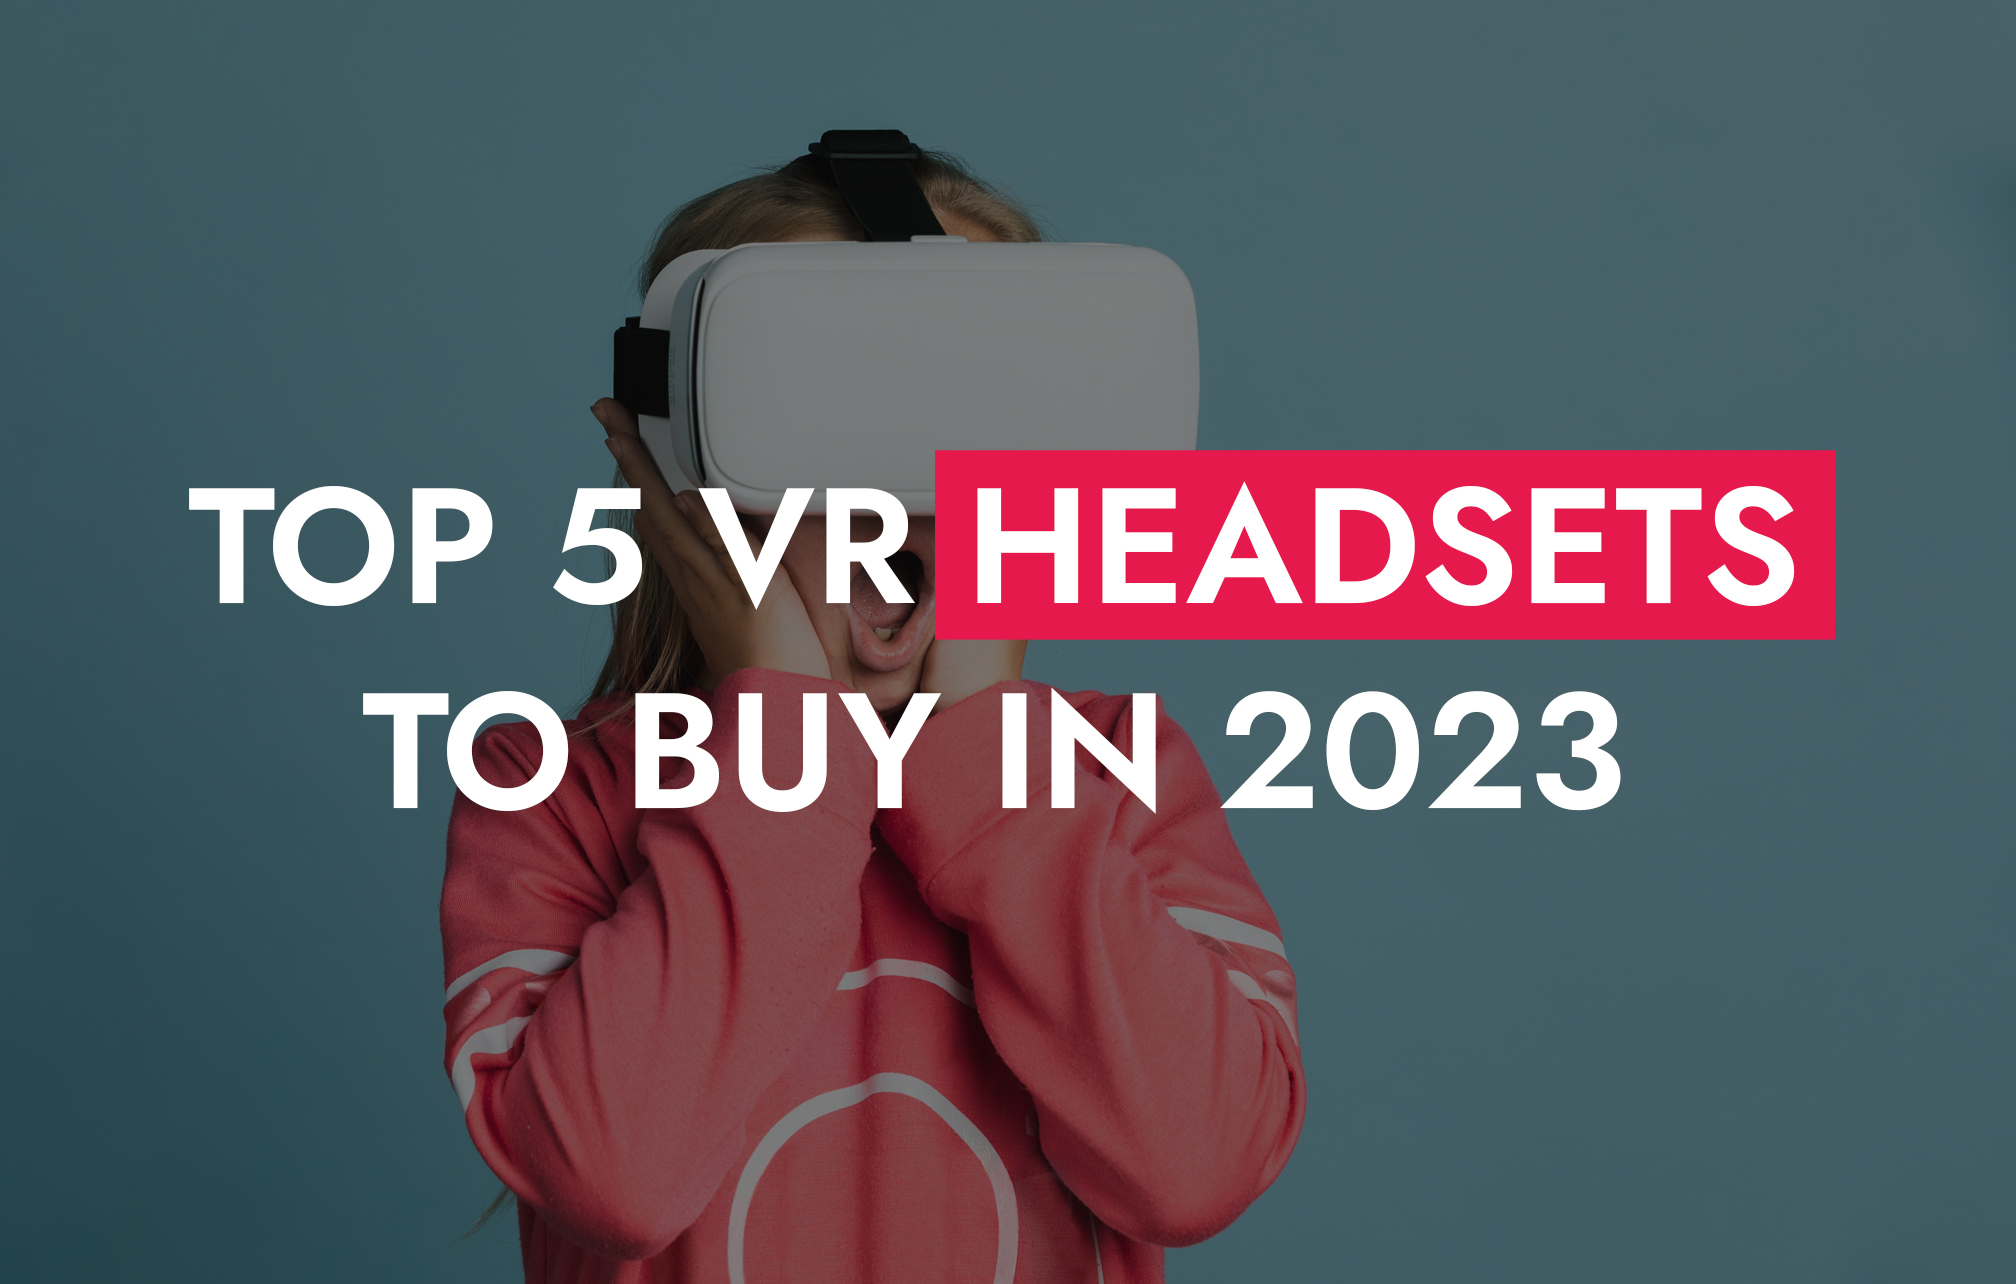 0011 07 22 Top 5 VR Headsets To Buy In 2023